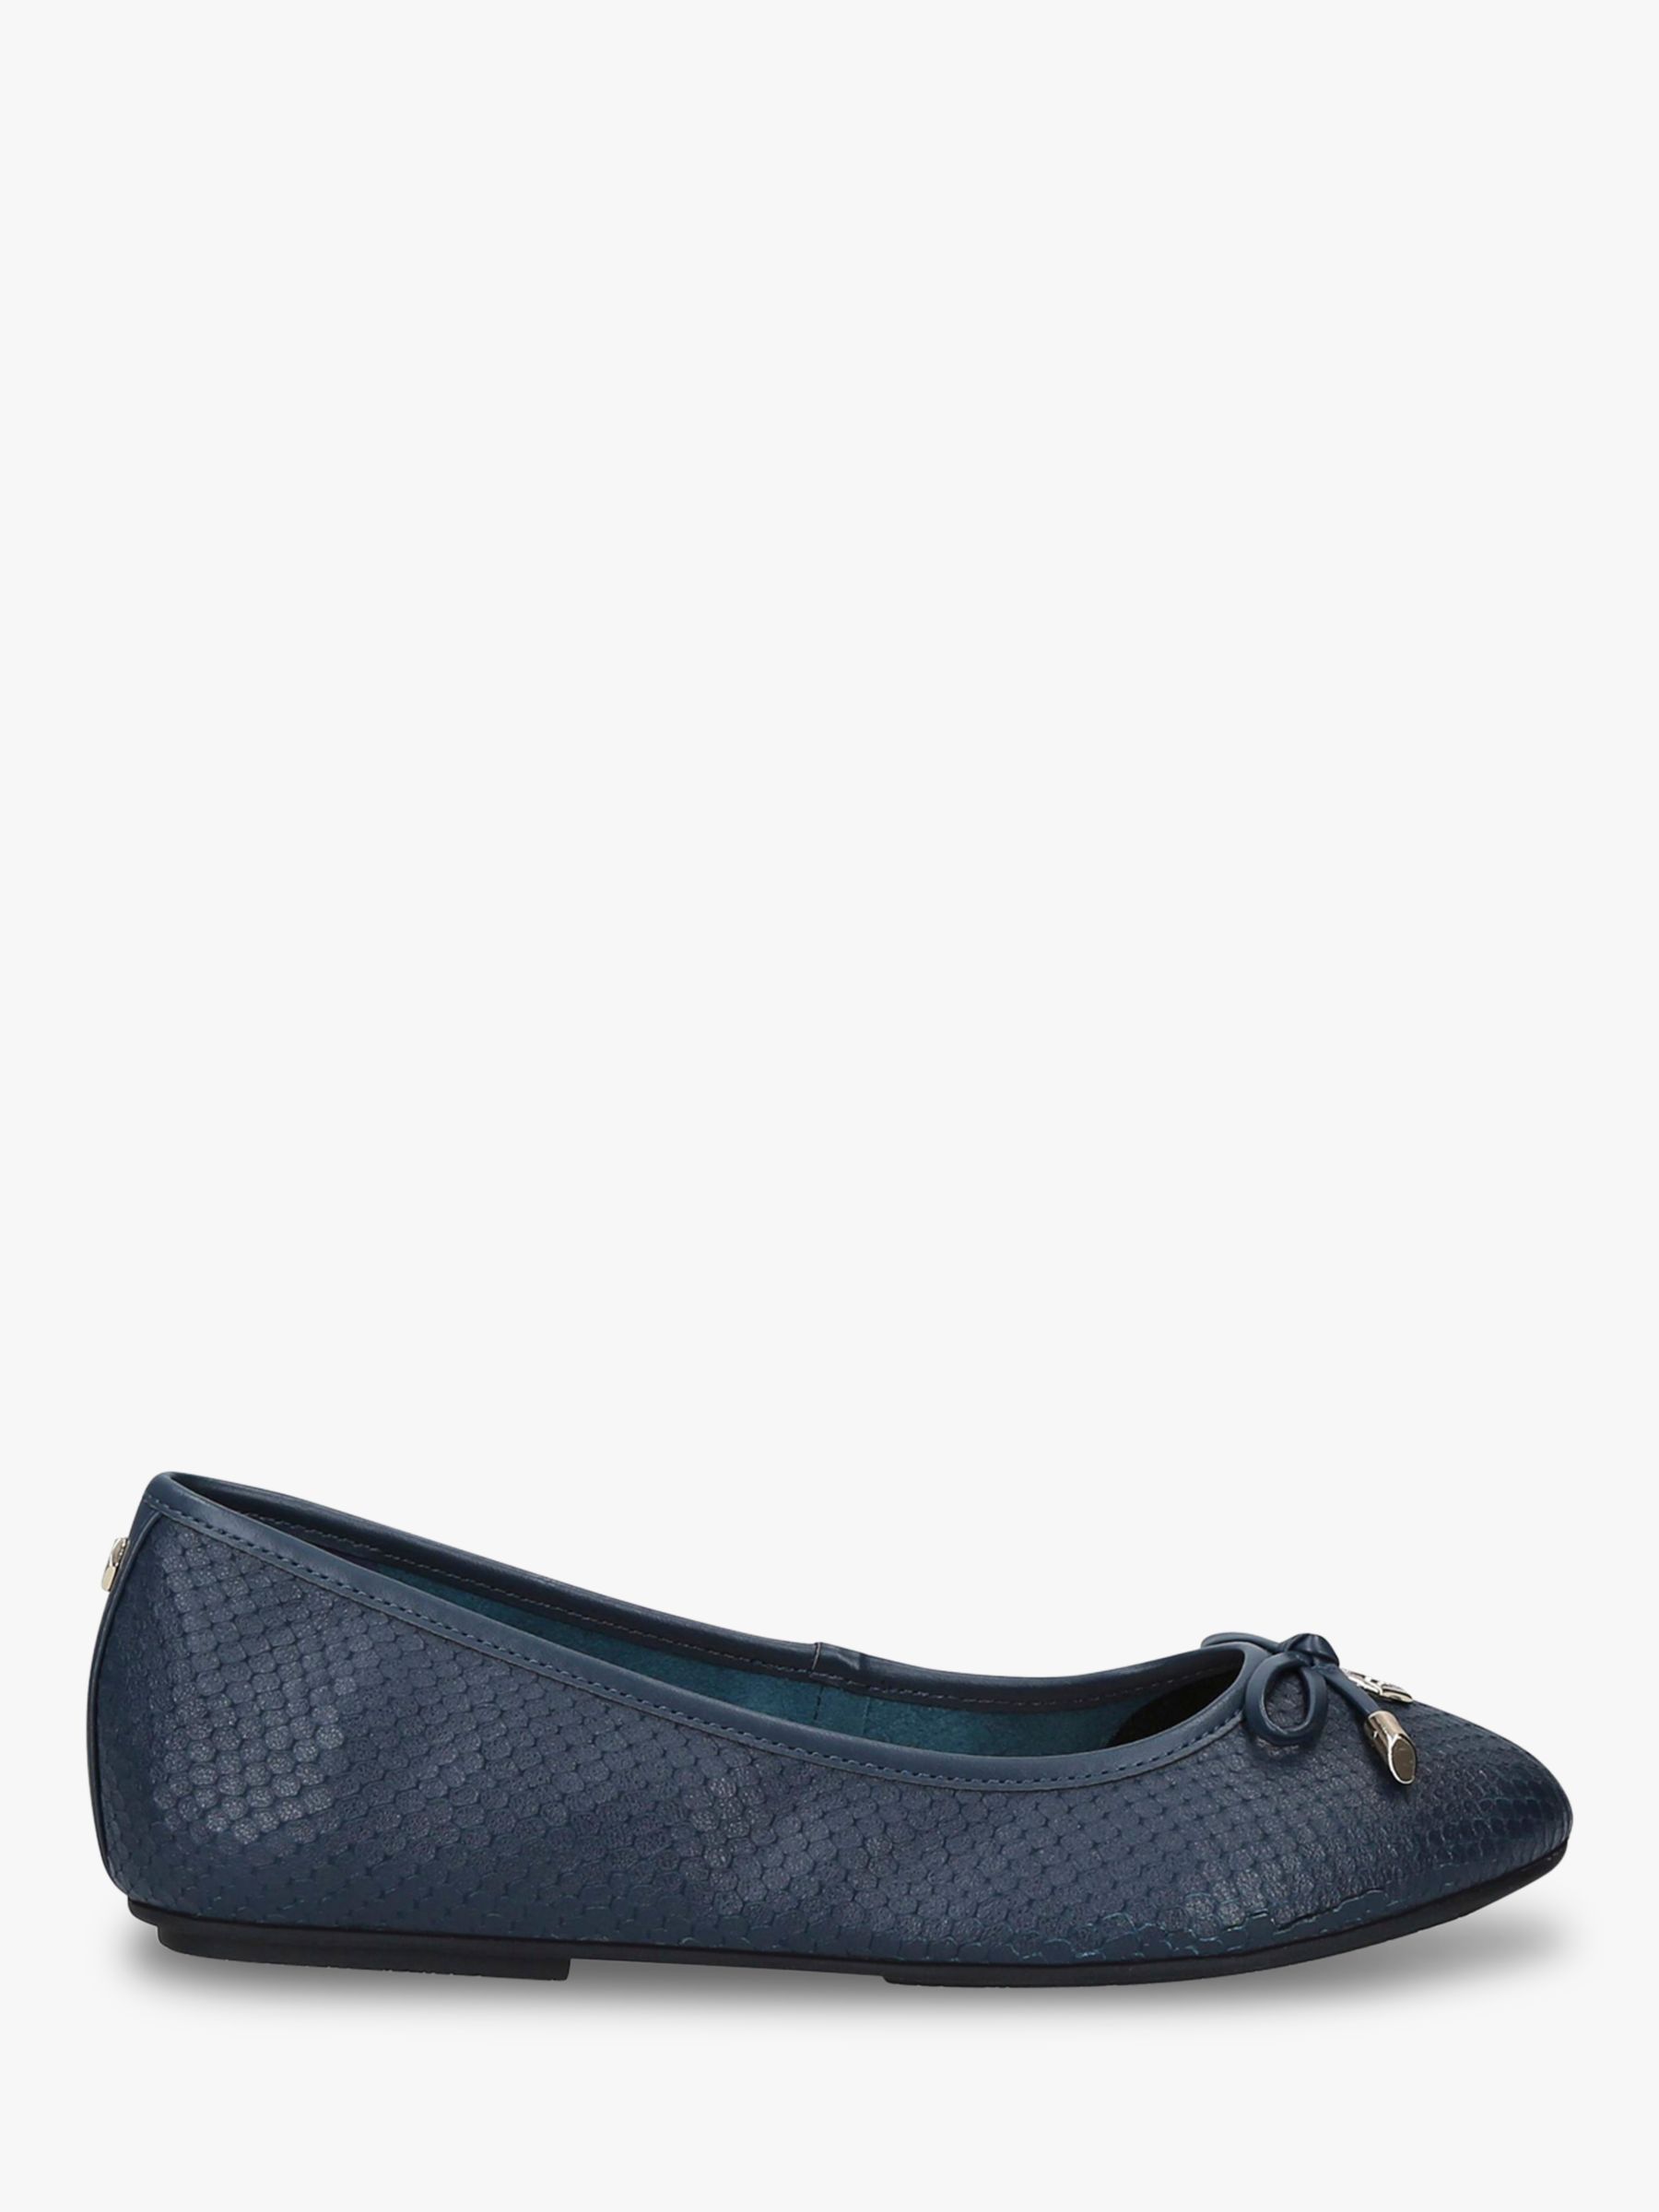 navy blue wide shoes